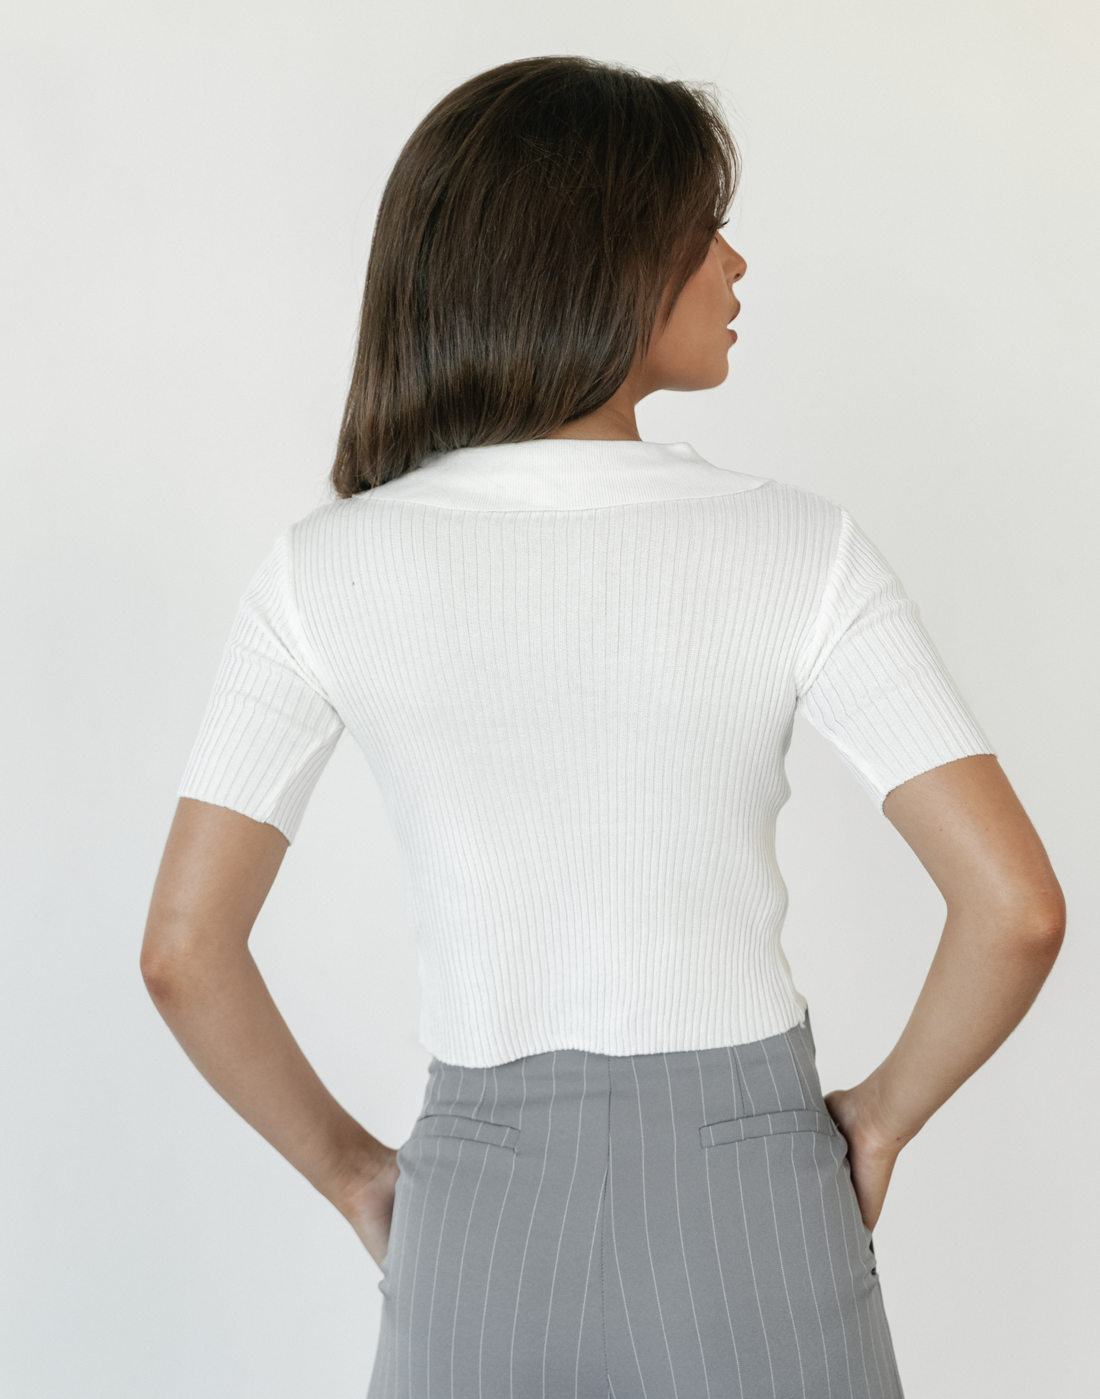 Monica Crop Top (White) - White Ribbed Knit Crop Top - Women's Top - Charcoal Clothing